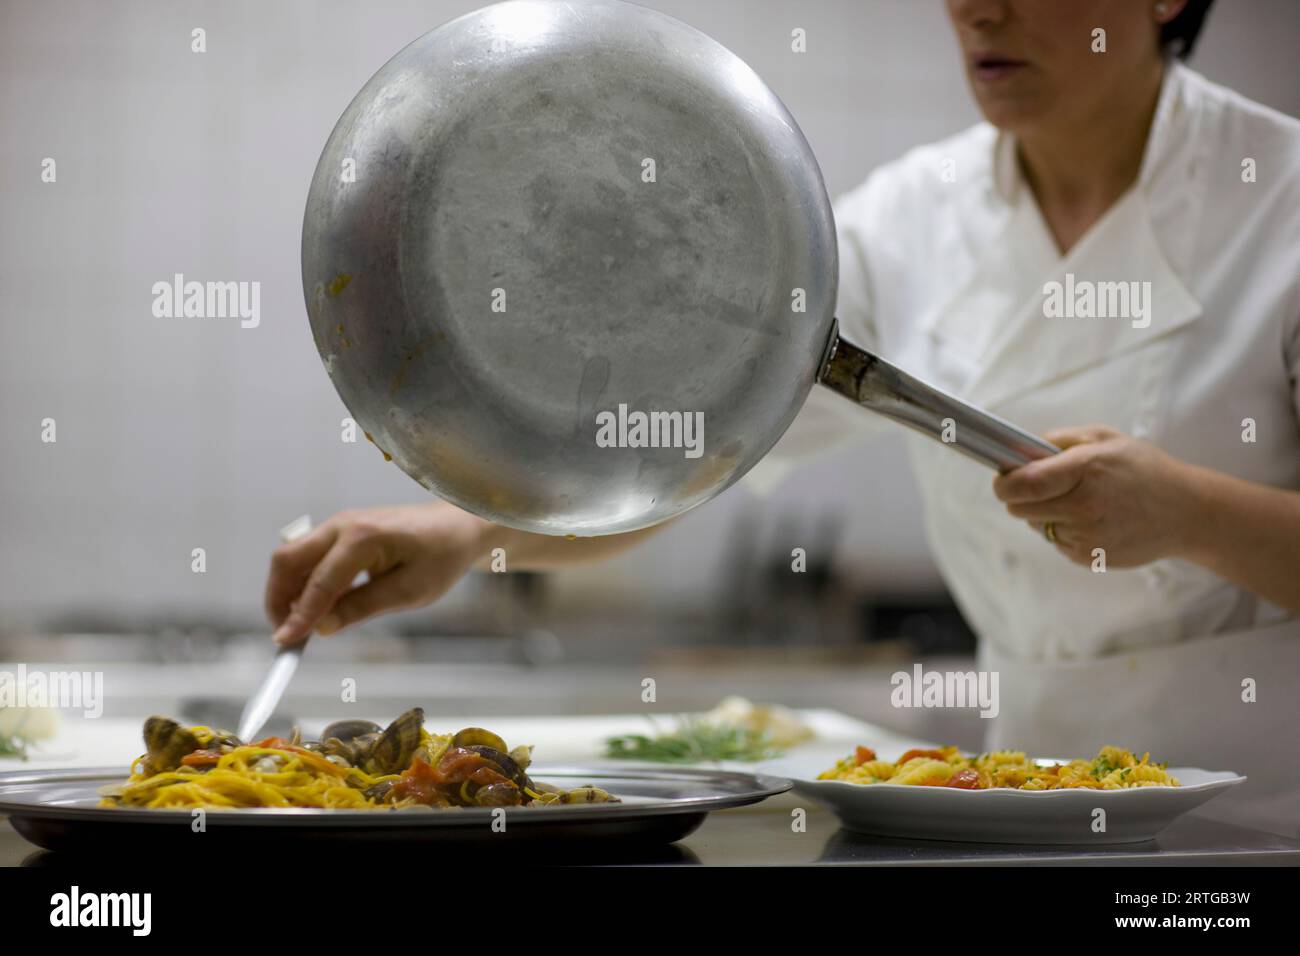 Woman chef holding a frying pan and preparing seafood pasta for service Stock Photo